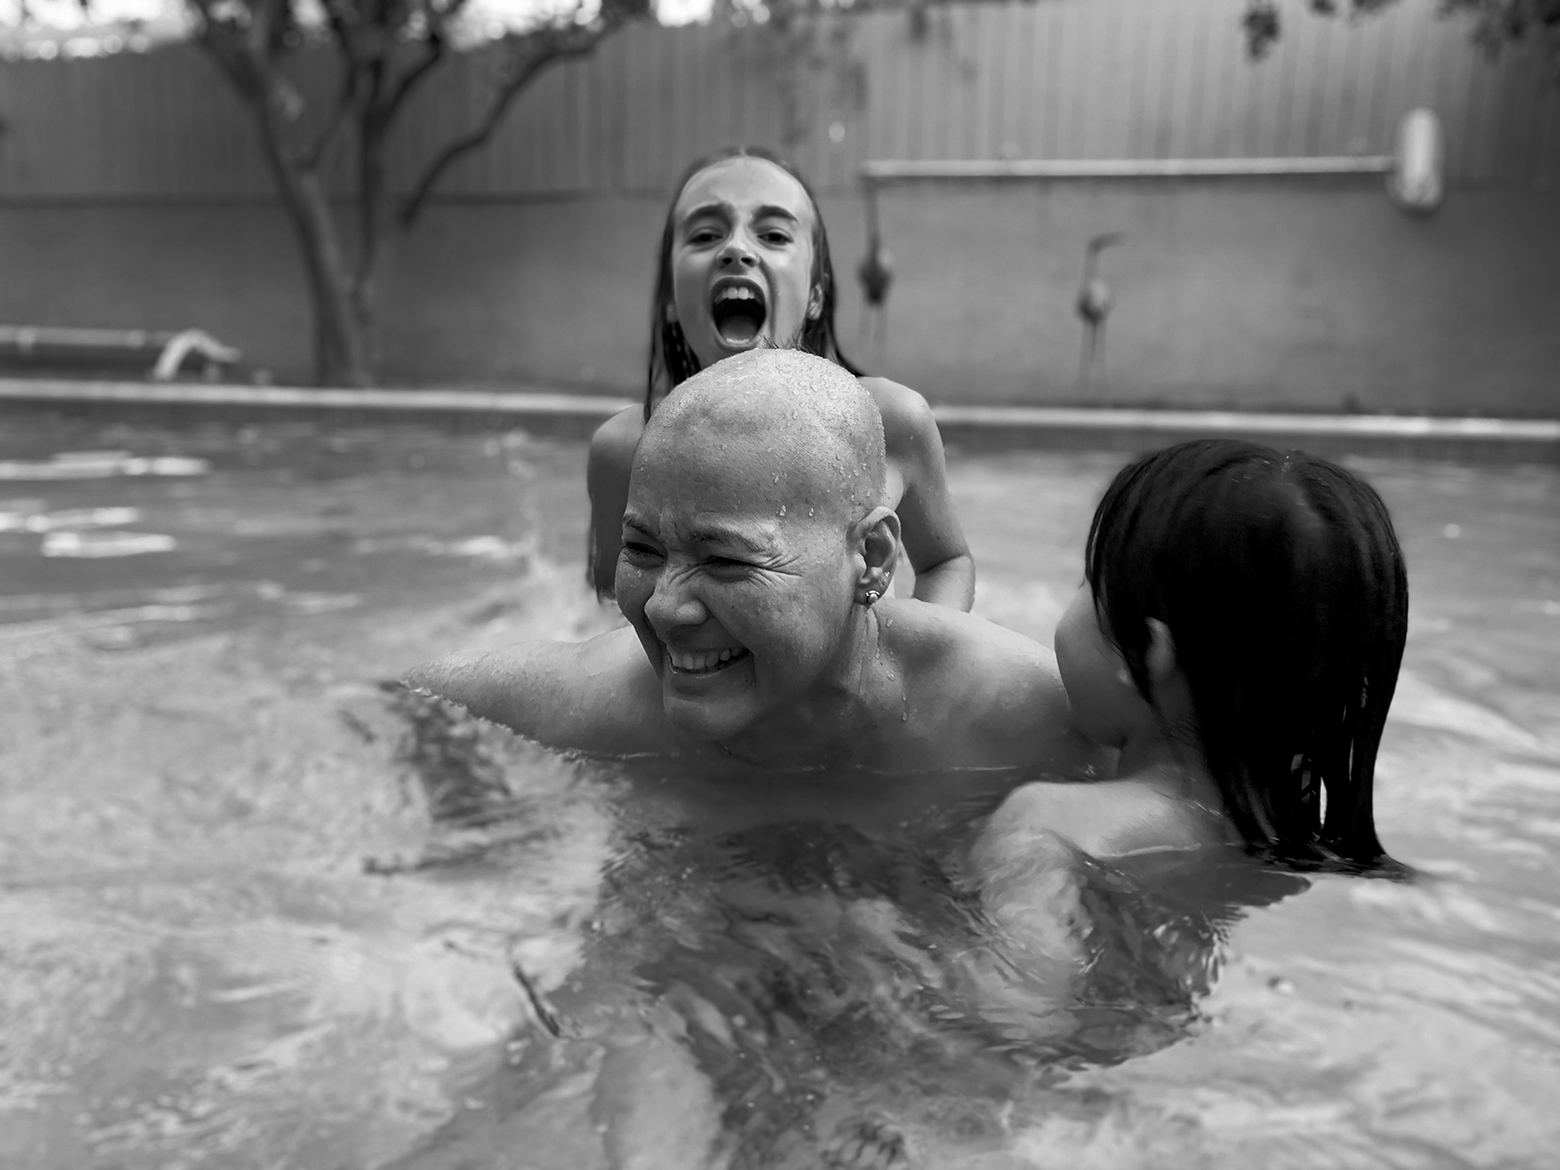 A joyful, bald-headed woman smiles brightly as she plays in an above-ground pool with two young girls.